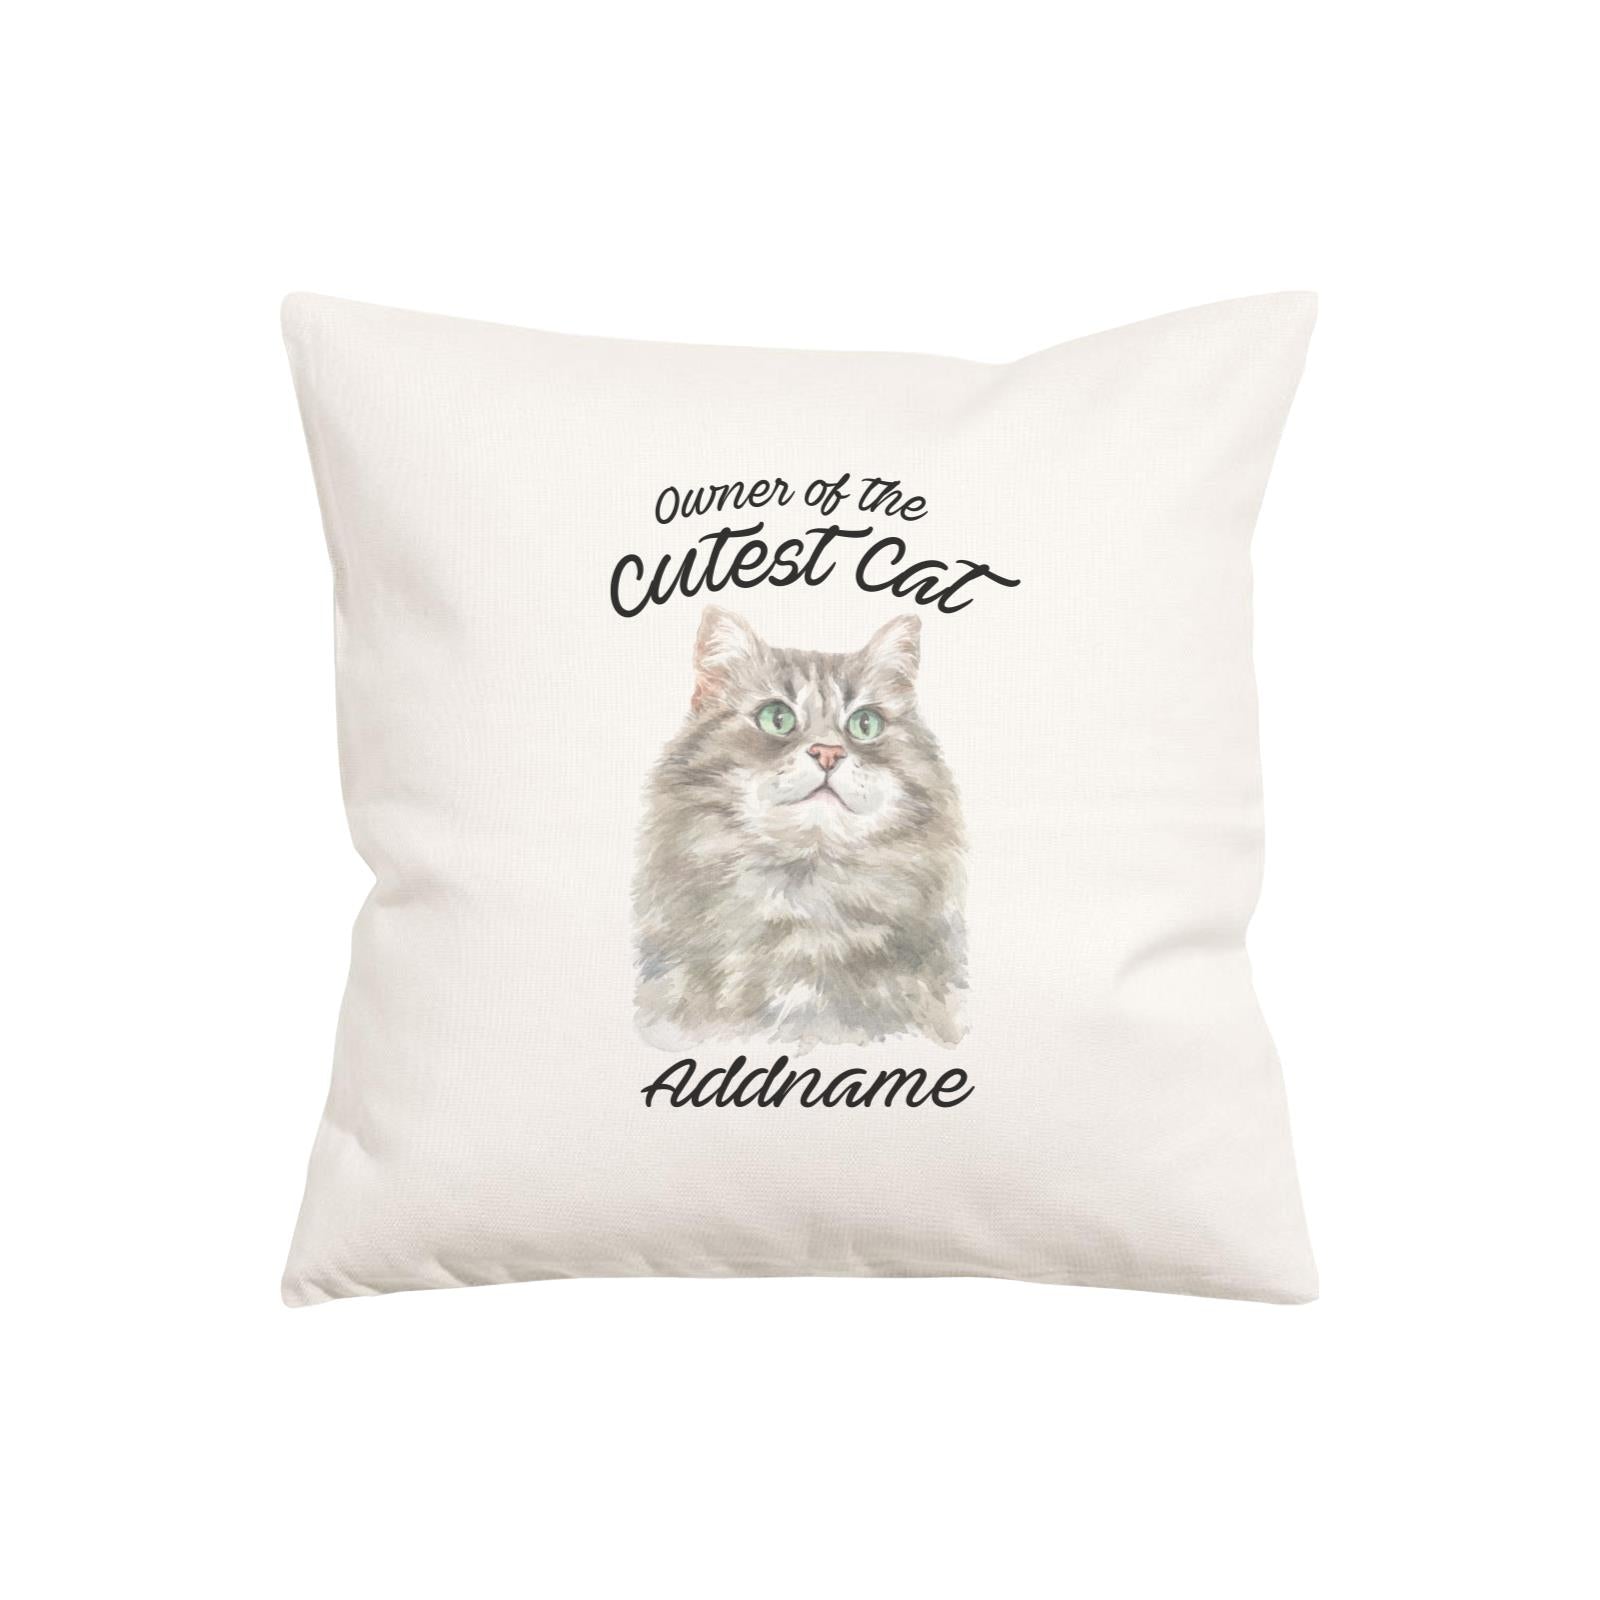 Watercolor Owner Of The Cutest Cat Siberian Cat Grey Addname Pillow Cushion